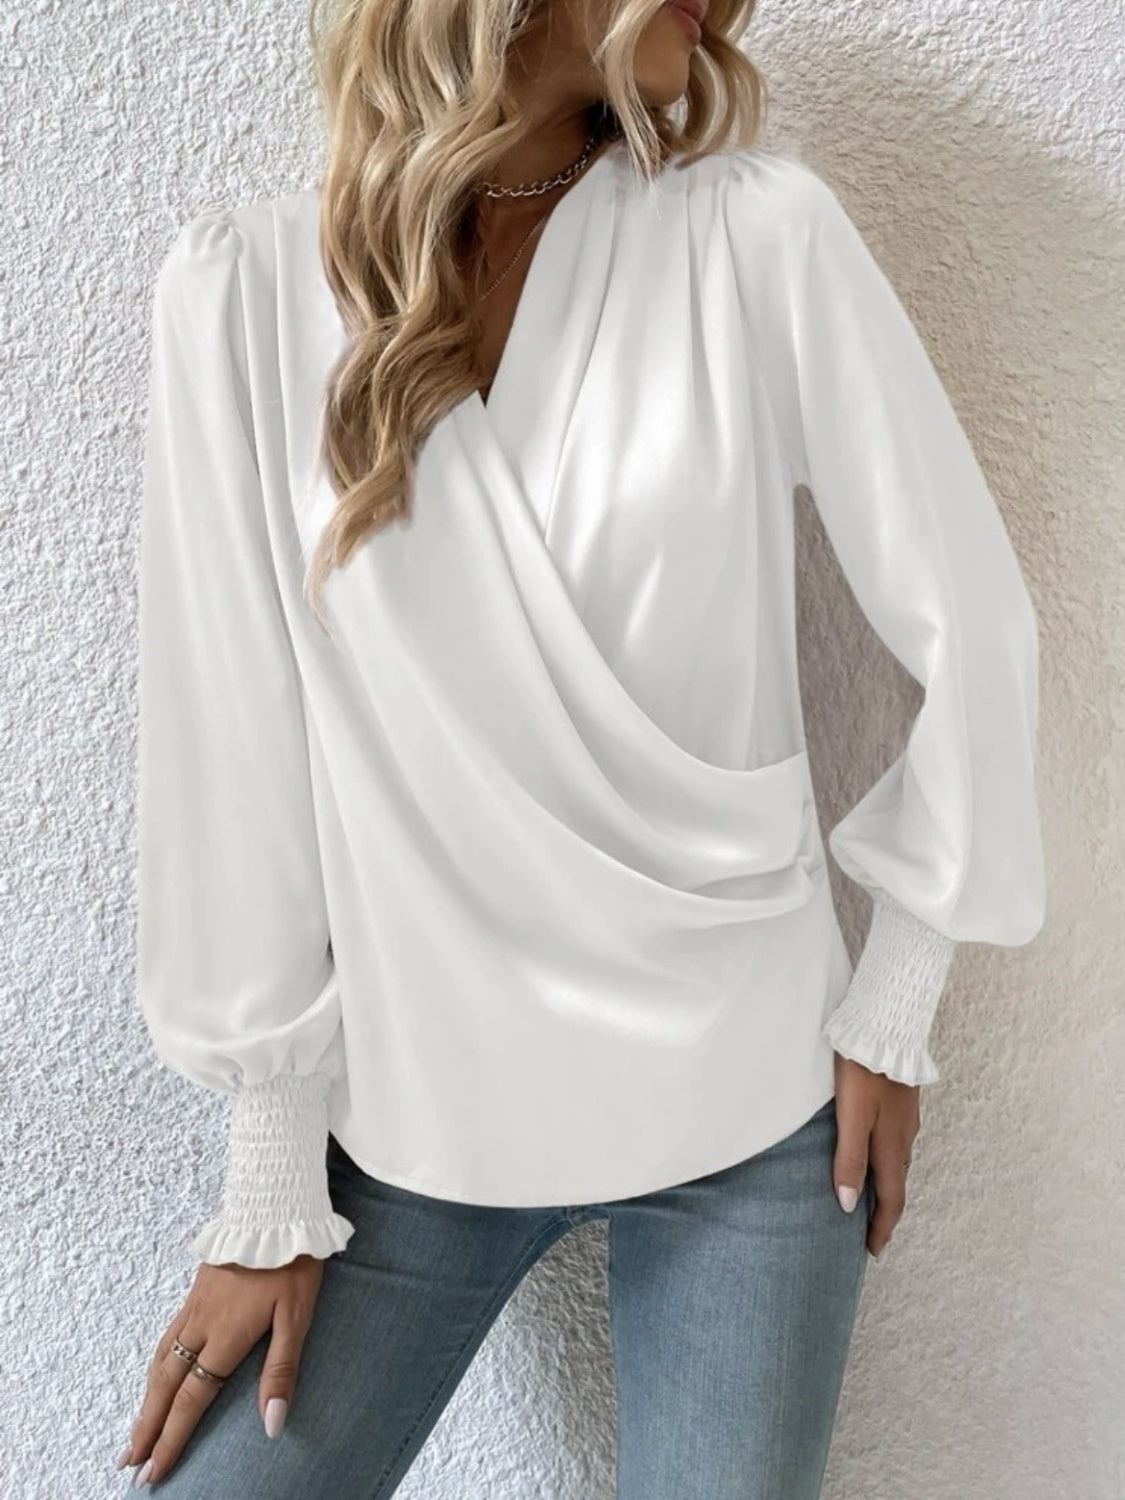 Surplice Smocked Lantern Sleeve Blouse - White / S - Women’s Clothing & Accessories - Shirts & Tops - 4 - 2024